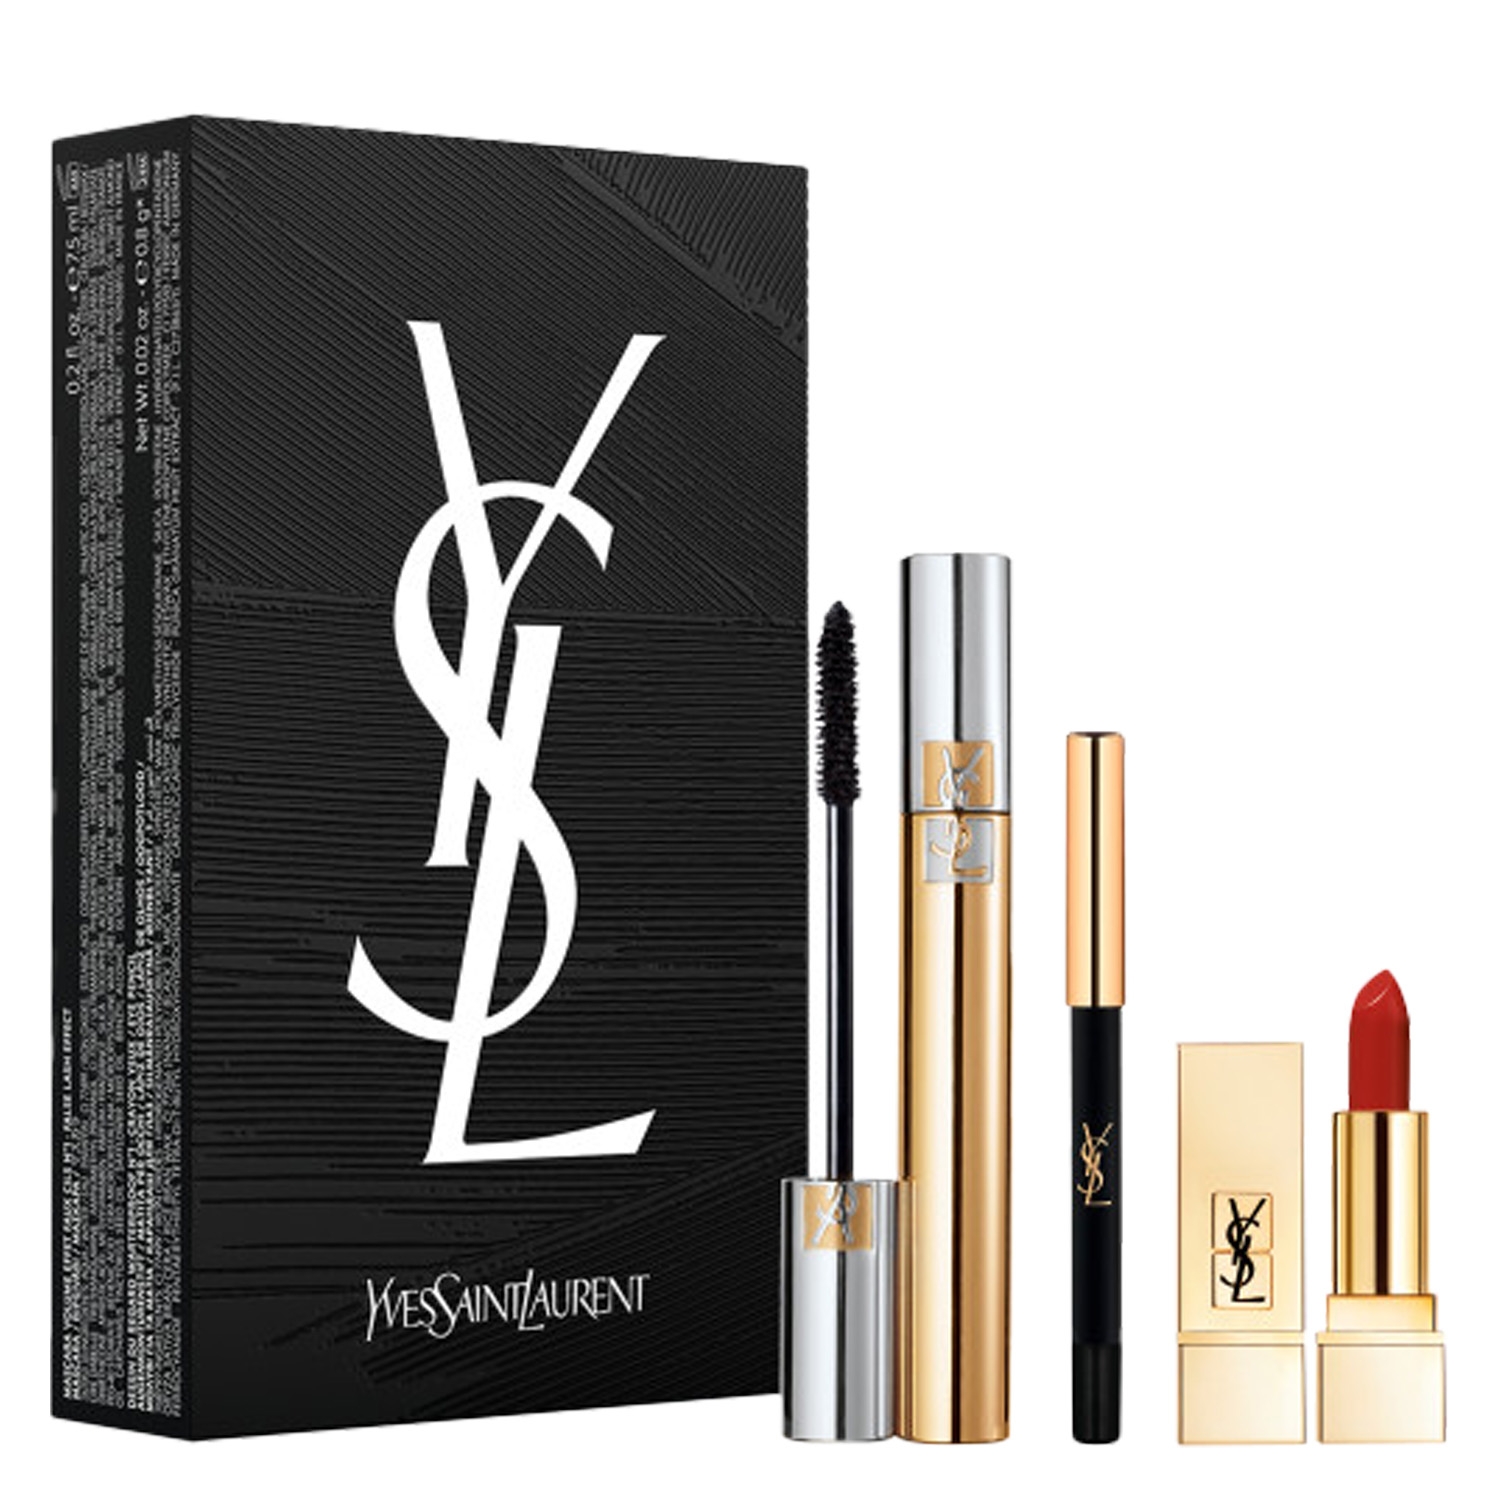 Product image from YSL Mascara - Volume Effet Faux Cils Kit